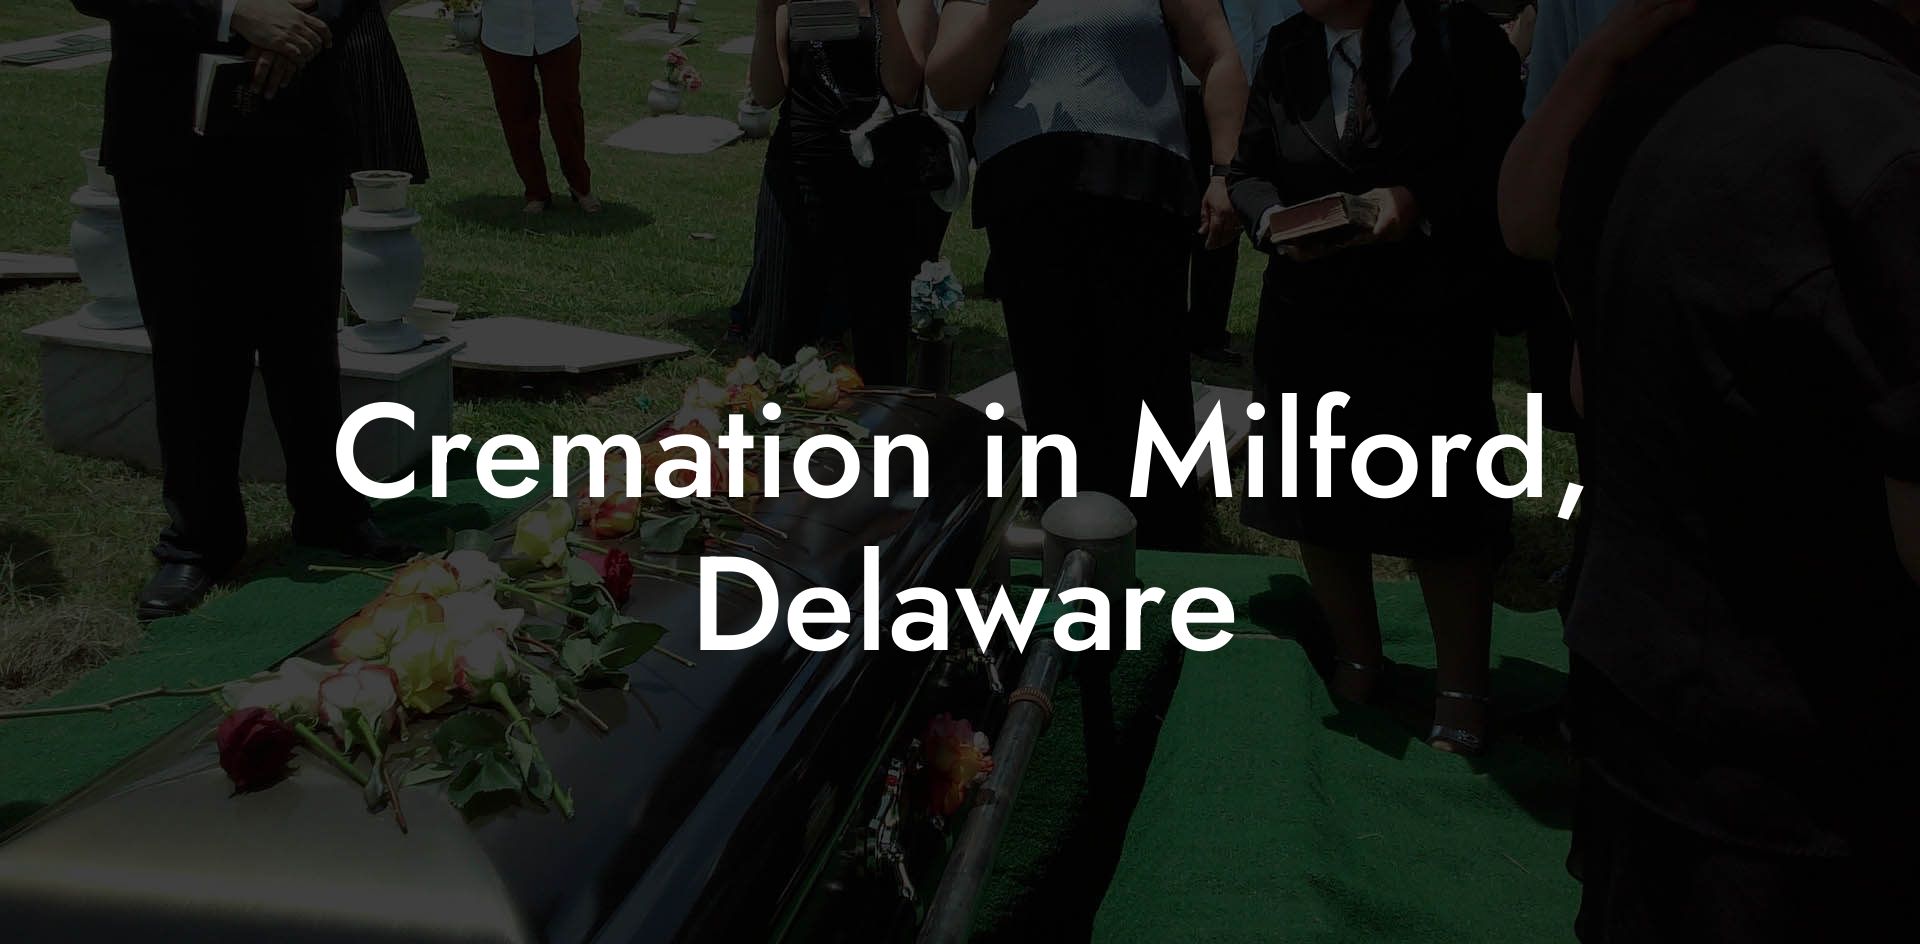 Cremation in Milford, Delaware